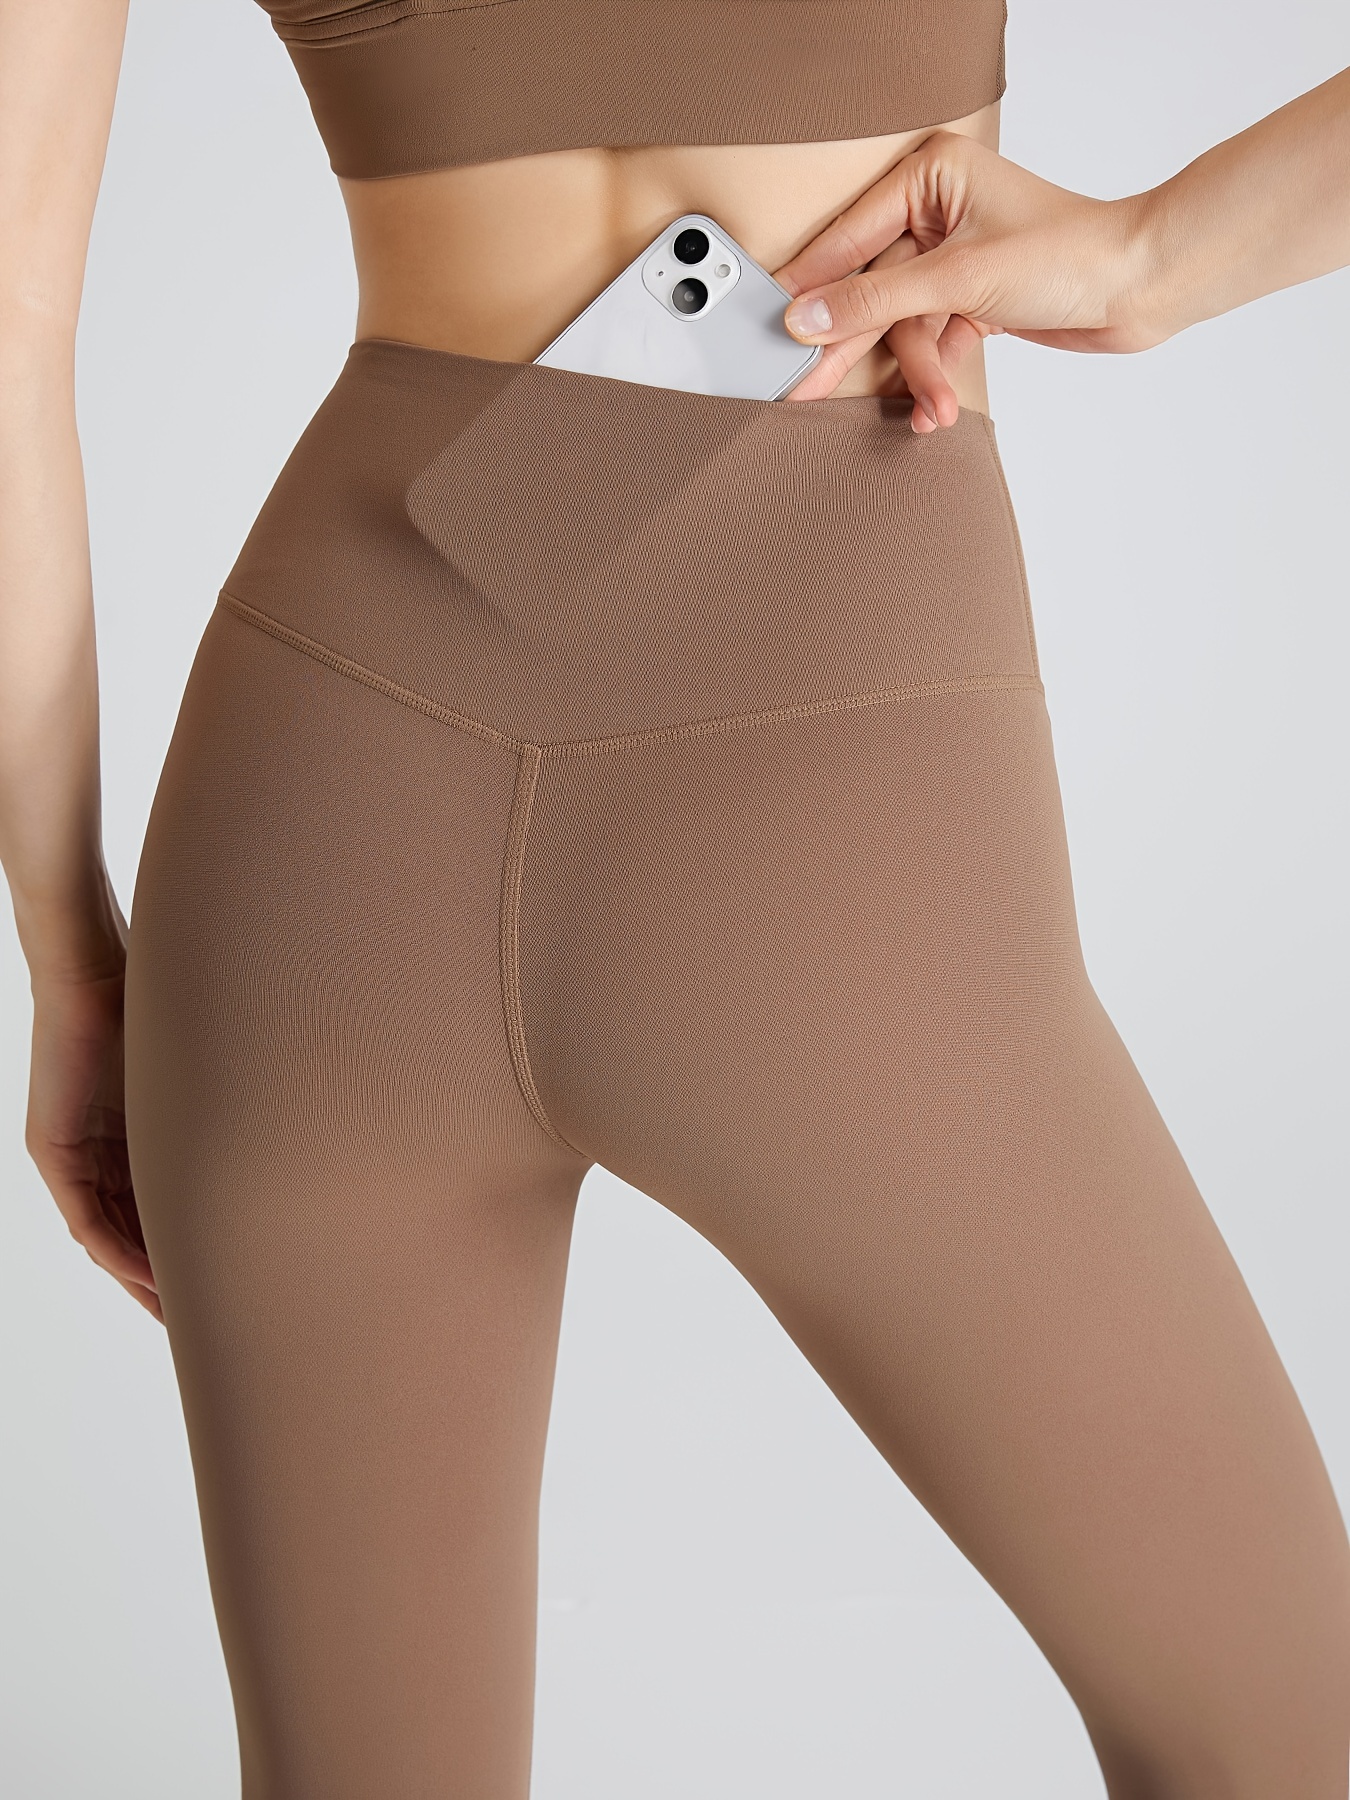 Women's Activewear: Solid Yoga Leggings - Ribbed Seamless High-waisted  Stretchy Butt Lifting Pants